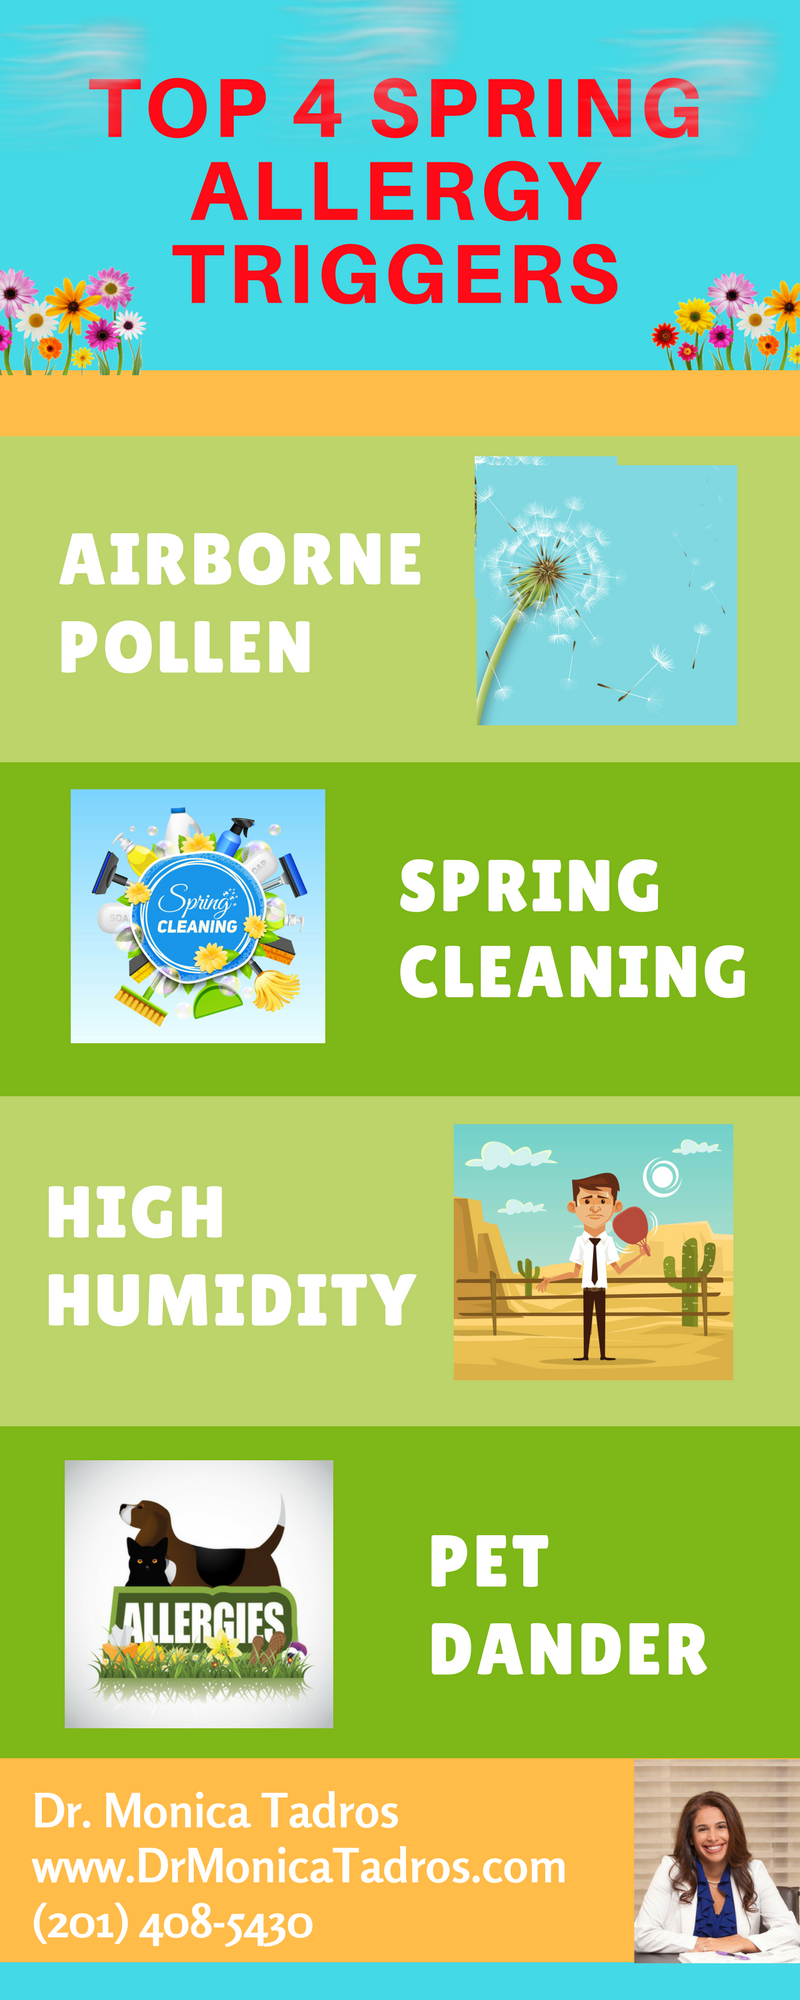 Top-4-spring-allergy-triggers-2